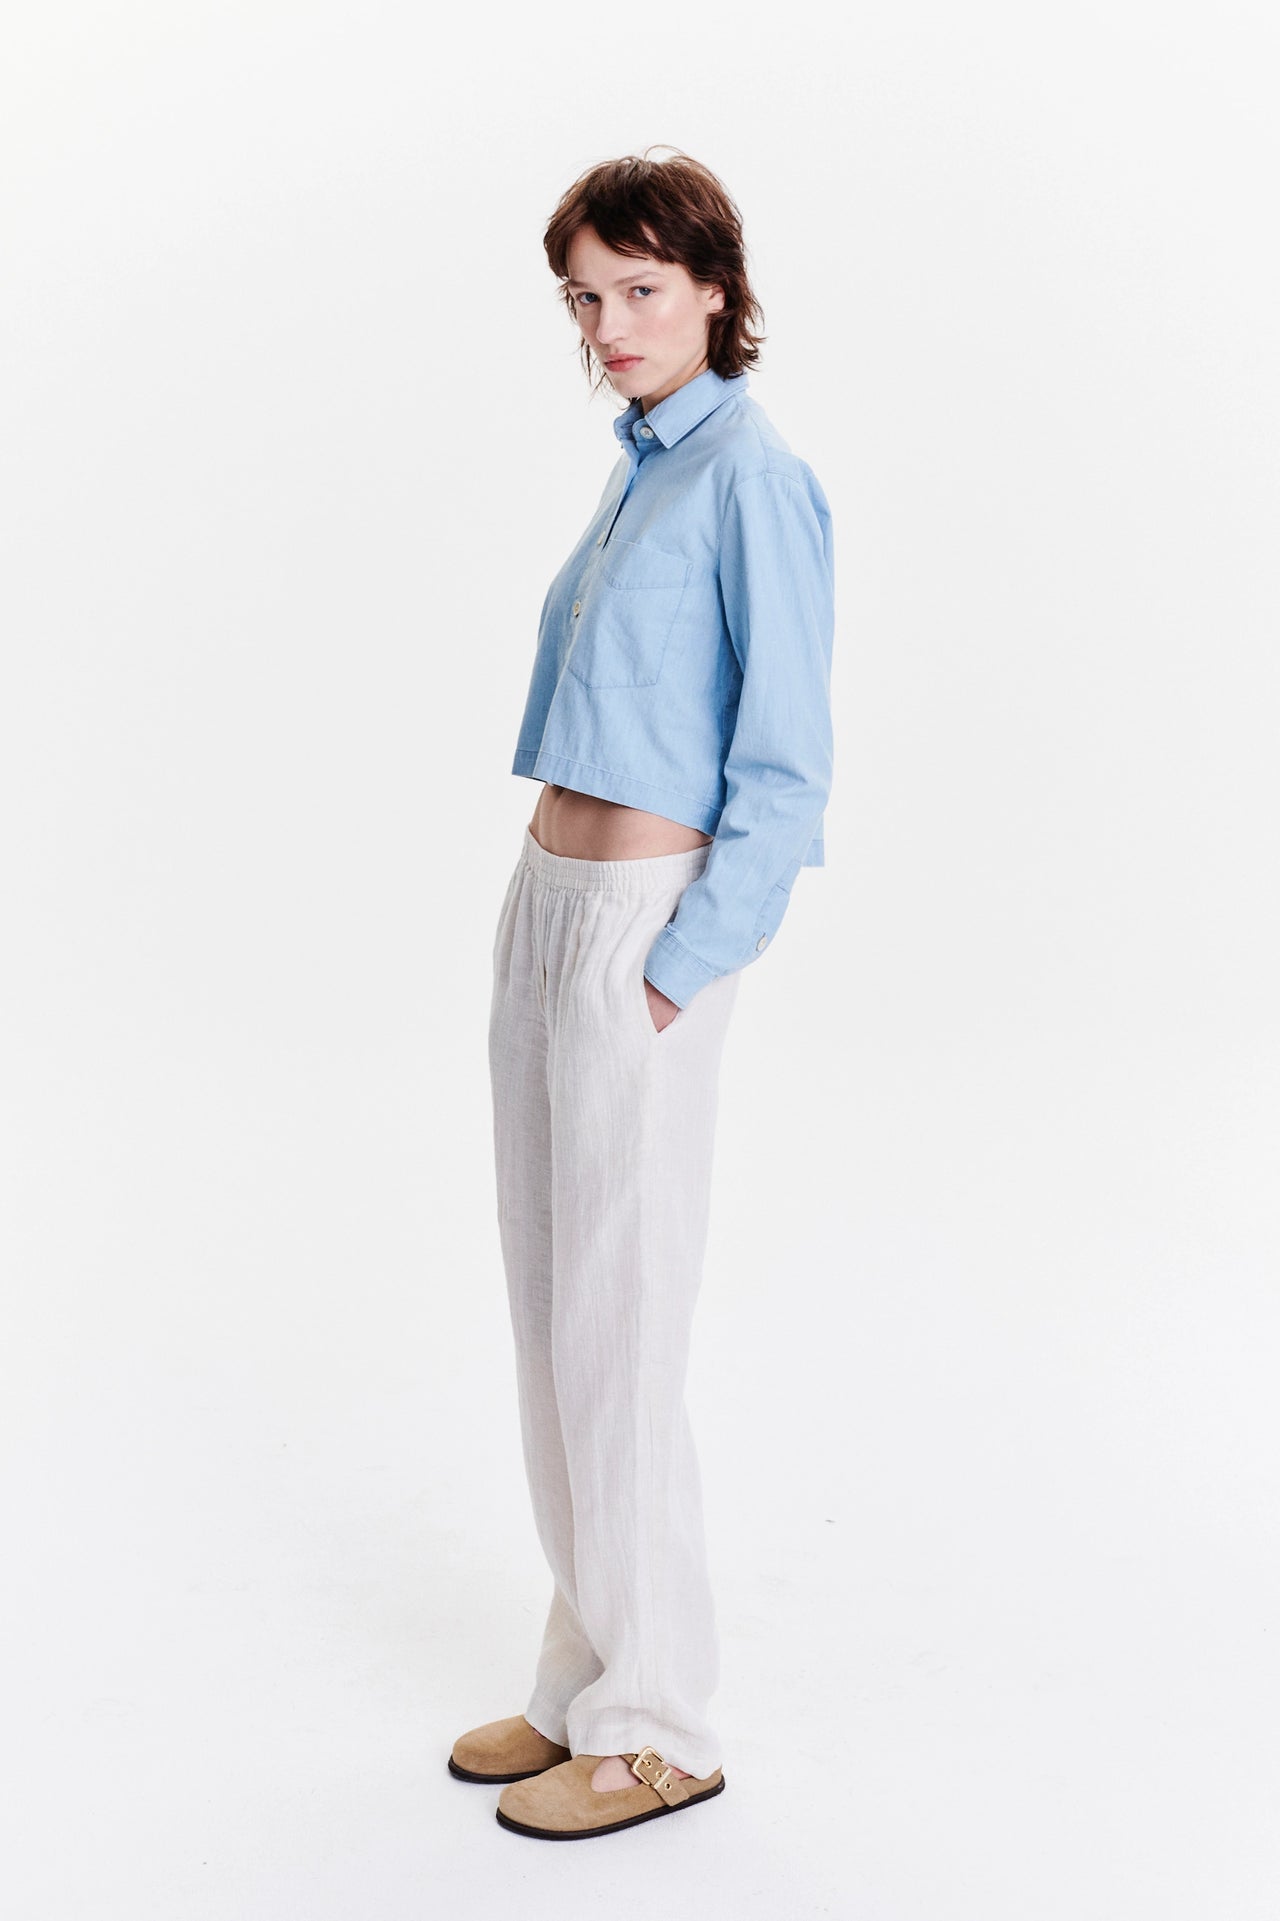 Relaxed Cropped Shirt in a Pale Sky Blue Bleached Italian Cotton Denim